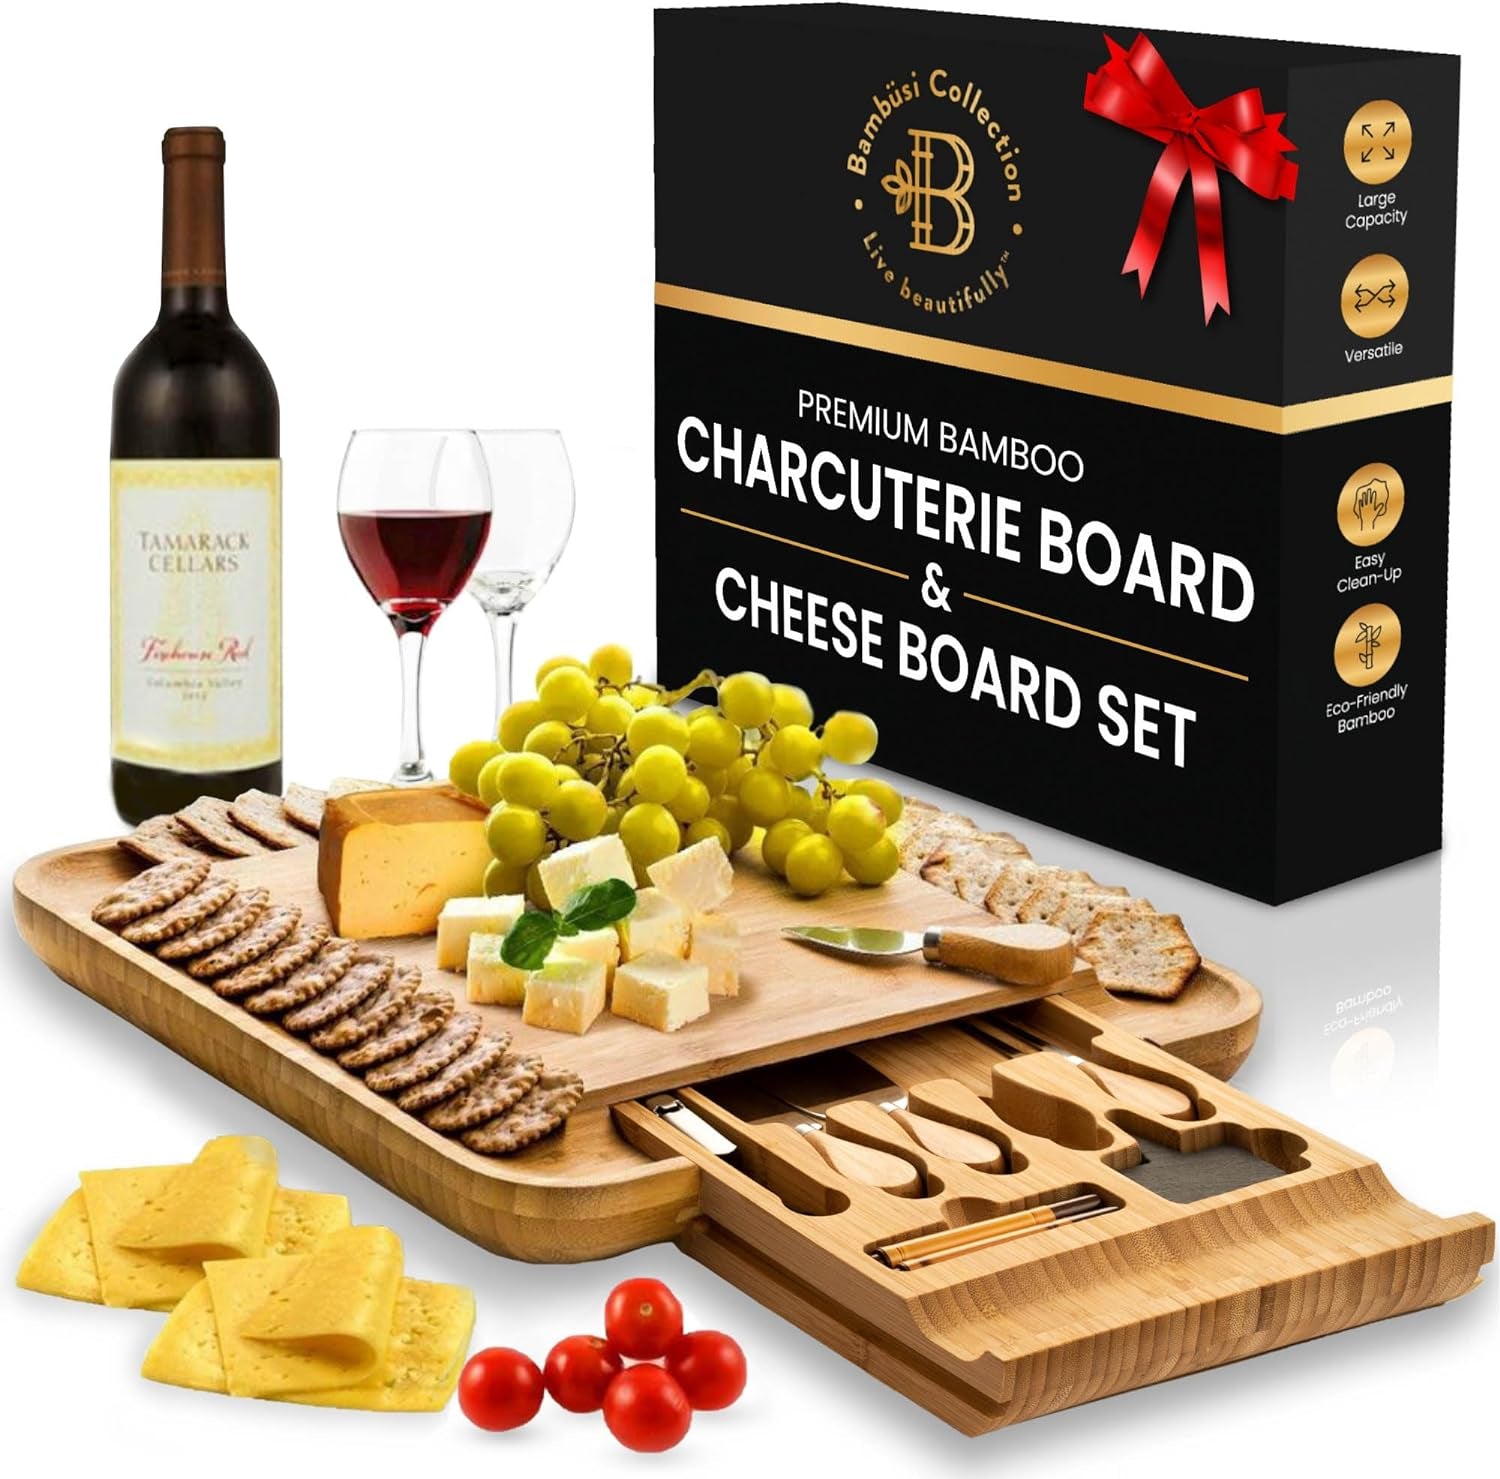 Charcuterie Boards Gift Set - Bamboo Cheese Board Large - Elegant Mothers Day Gifts for Mom - House Warming Gifts New Home - Wedding Gifts for Couple, Bridal Shower, Birthday Gifts for Women |